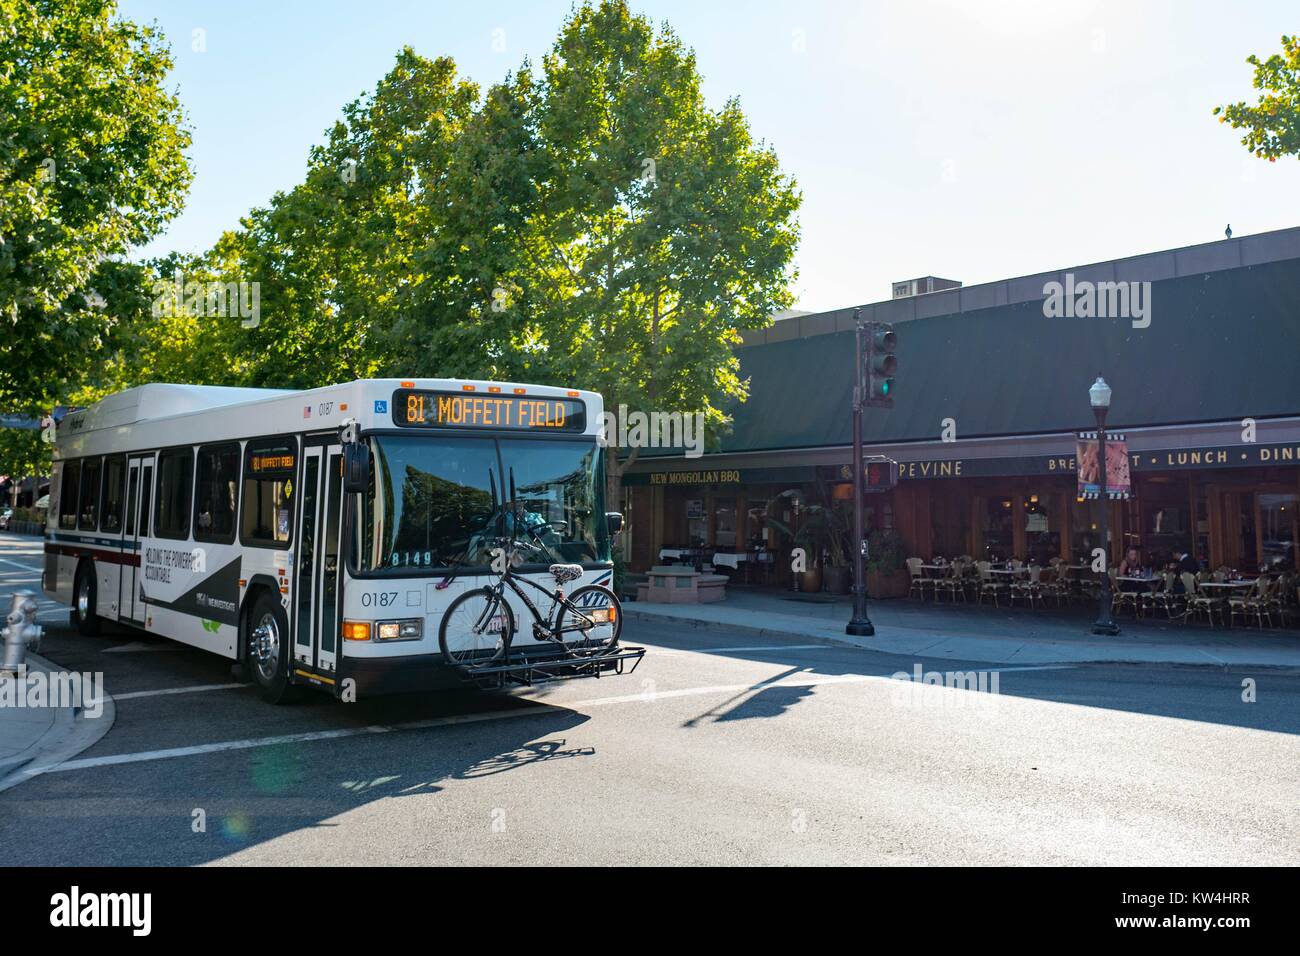 On Castro Street, in the downtown portion of the Silicon Valley town of Mountain View, California, a bus passes by with a sign indicating that it is traveling to Moffett Field, a civil and military airfield, Mountain View, California, August 24, 2016. Stock Photo